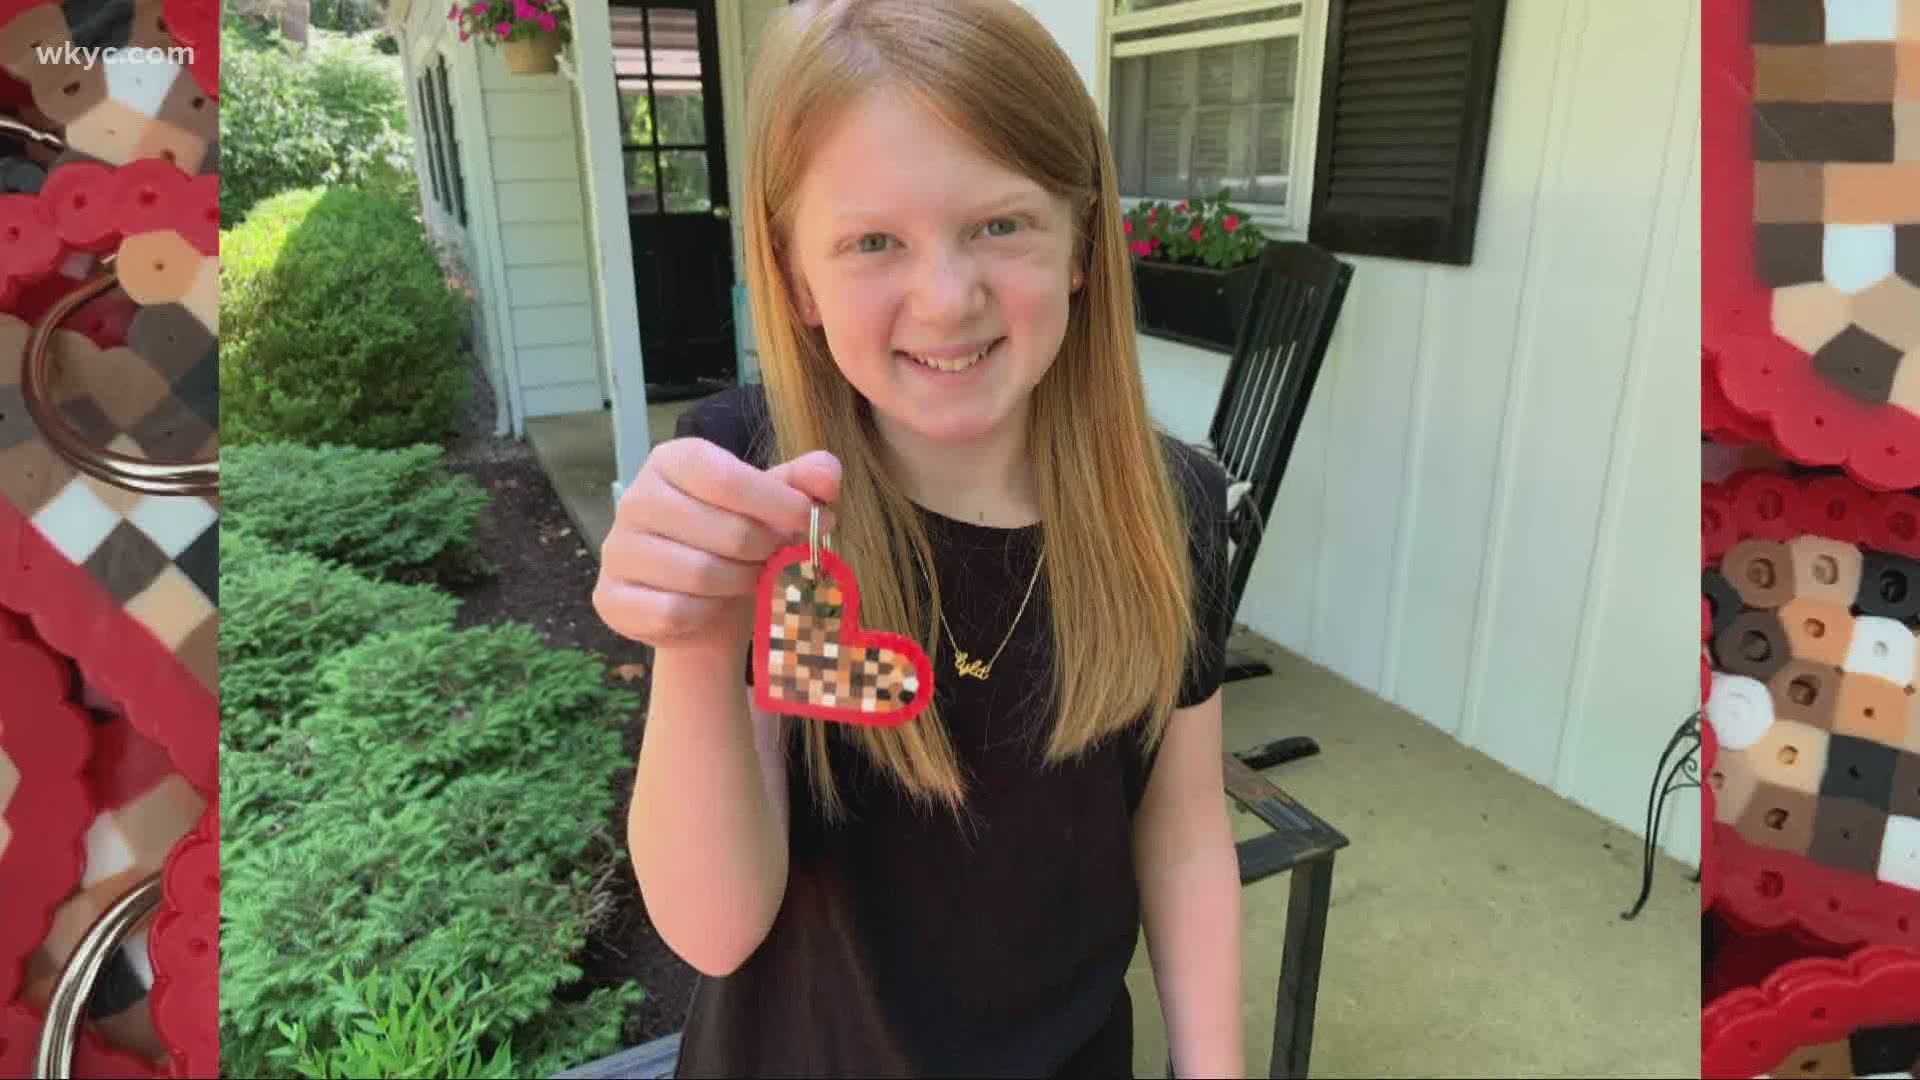 Beads for Change is the creation of Lyla Levin to help raise money amid racial injustice. If you'd like to buy one, please send an e-mail to beadsforchangenow@gmail.